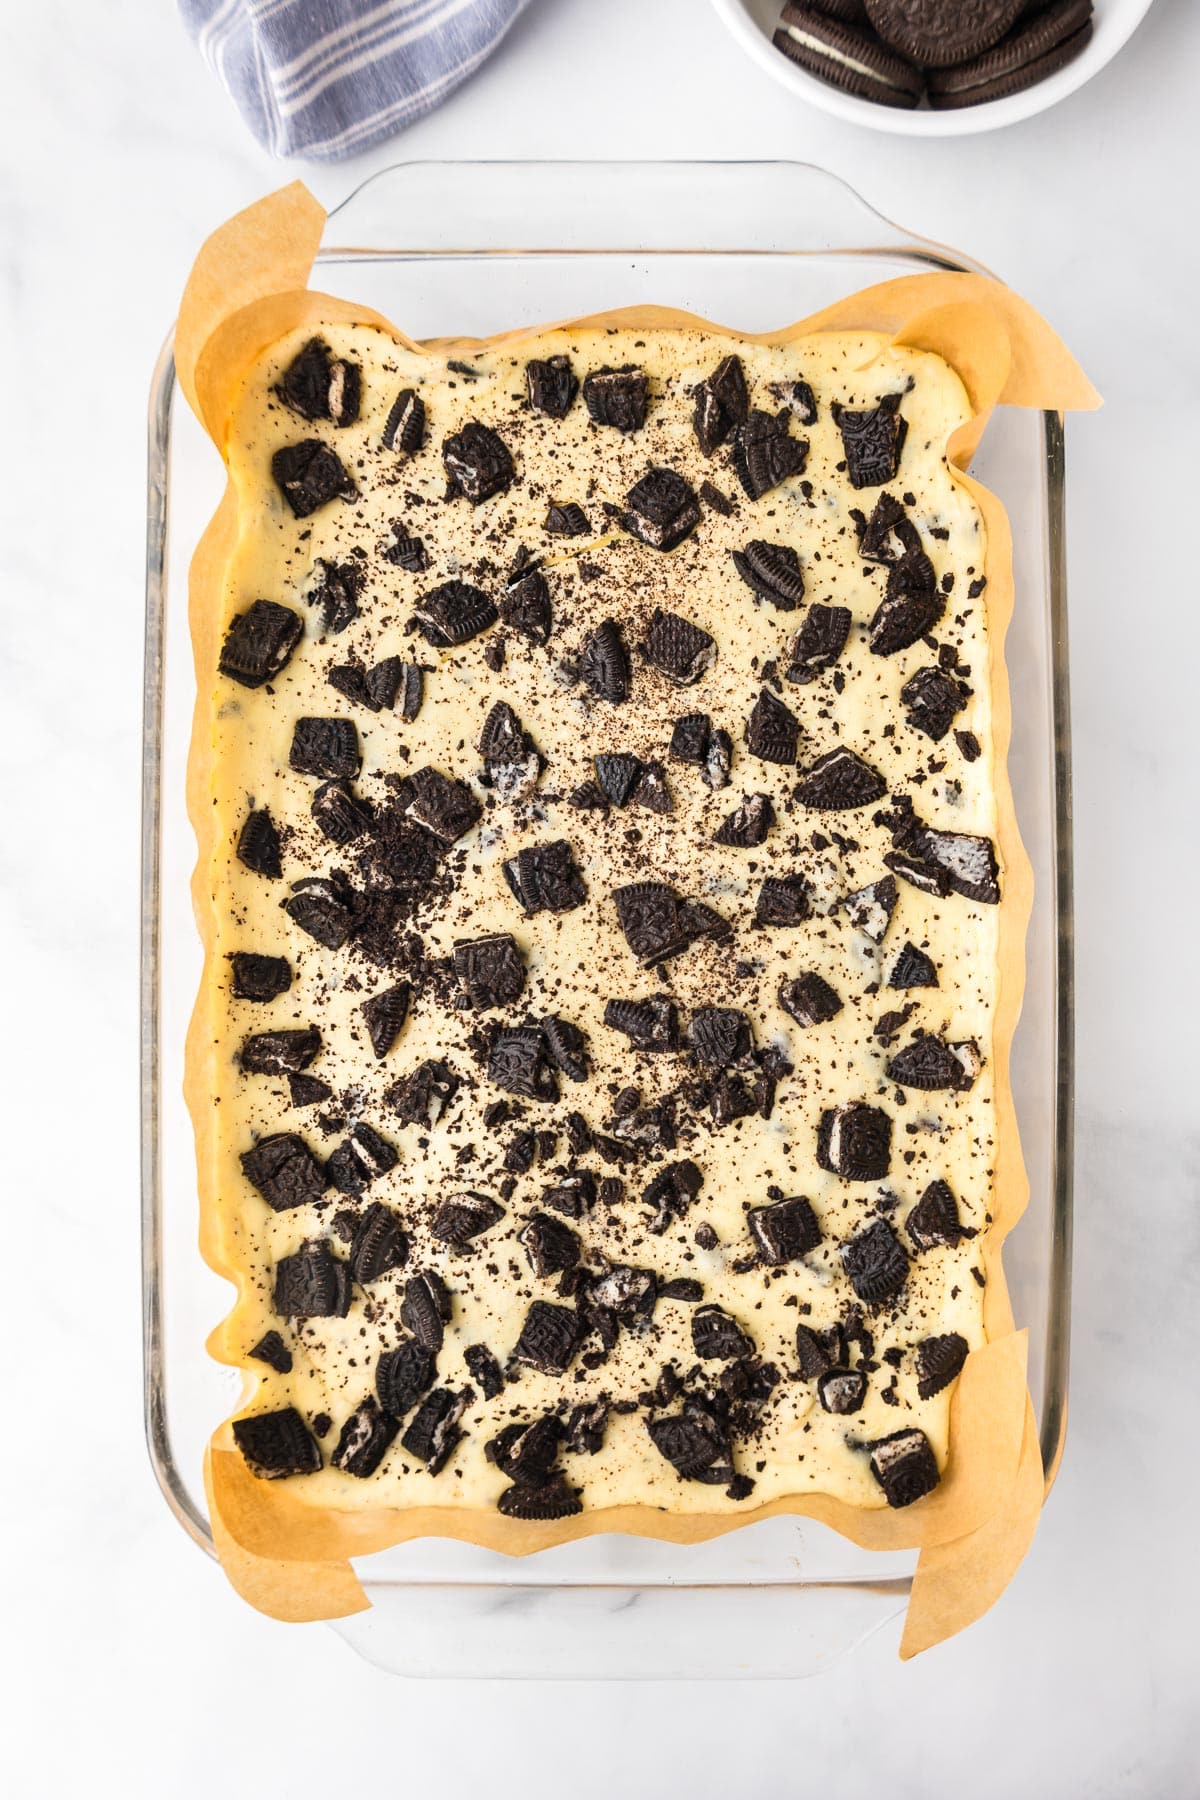 Oreo cheesecake bars in a parchment lined glass pan after baking.